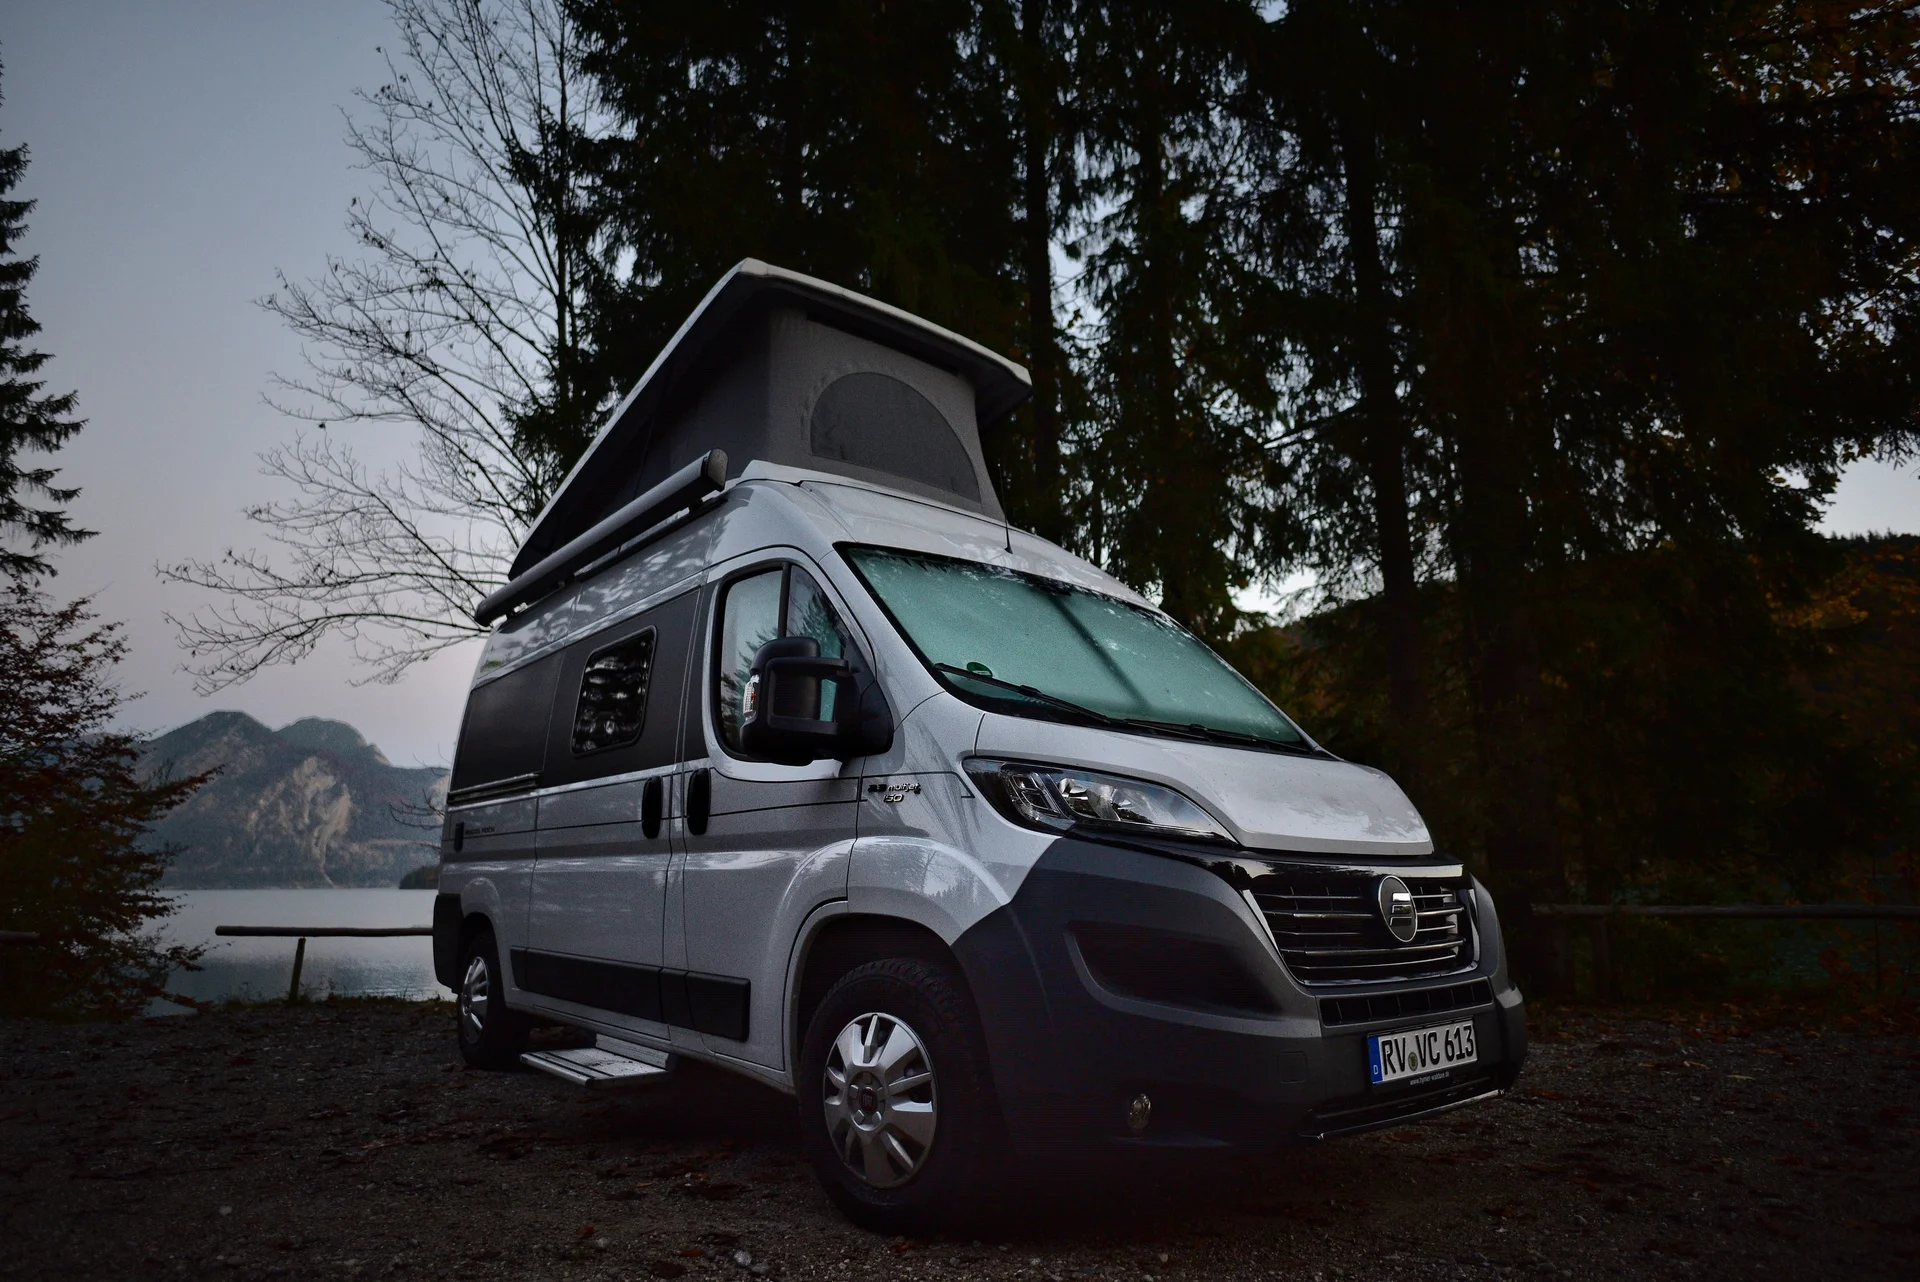 Top Tips For Planning Your Campervan Holiday